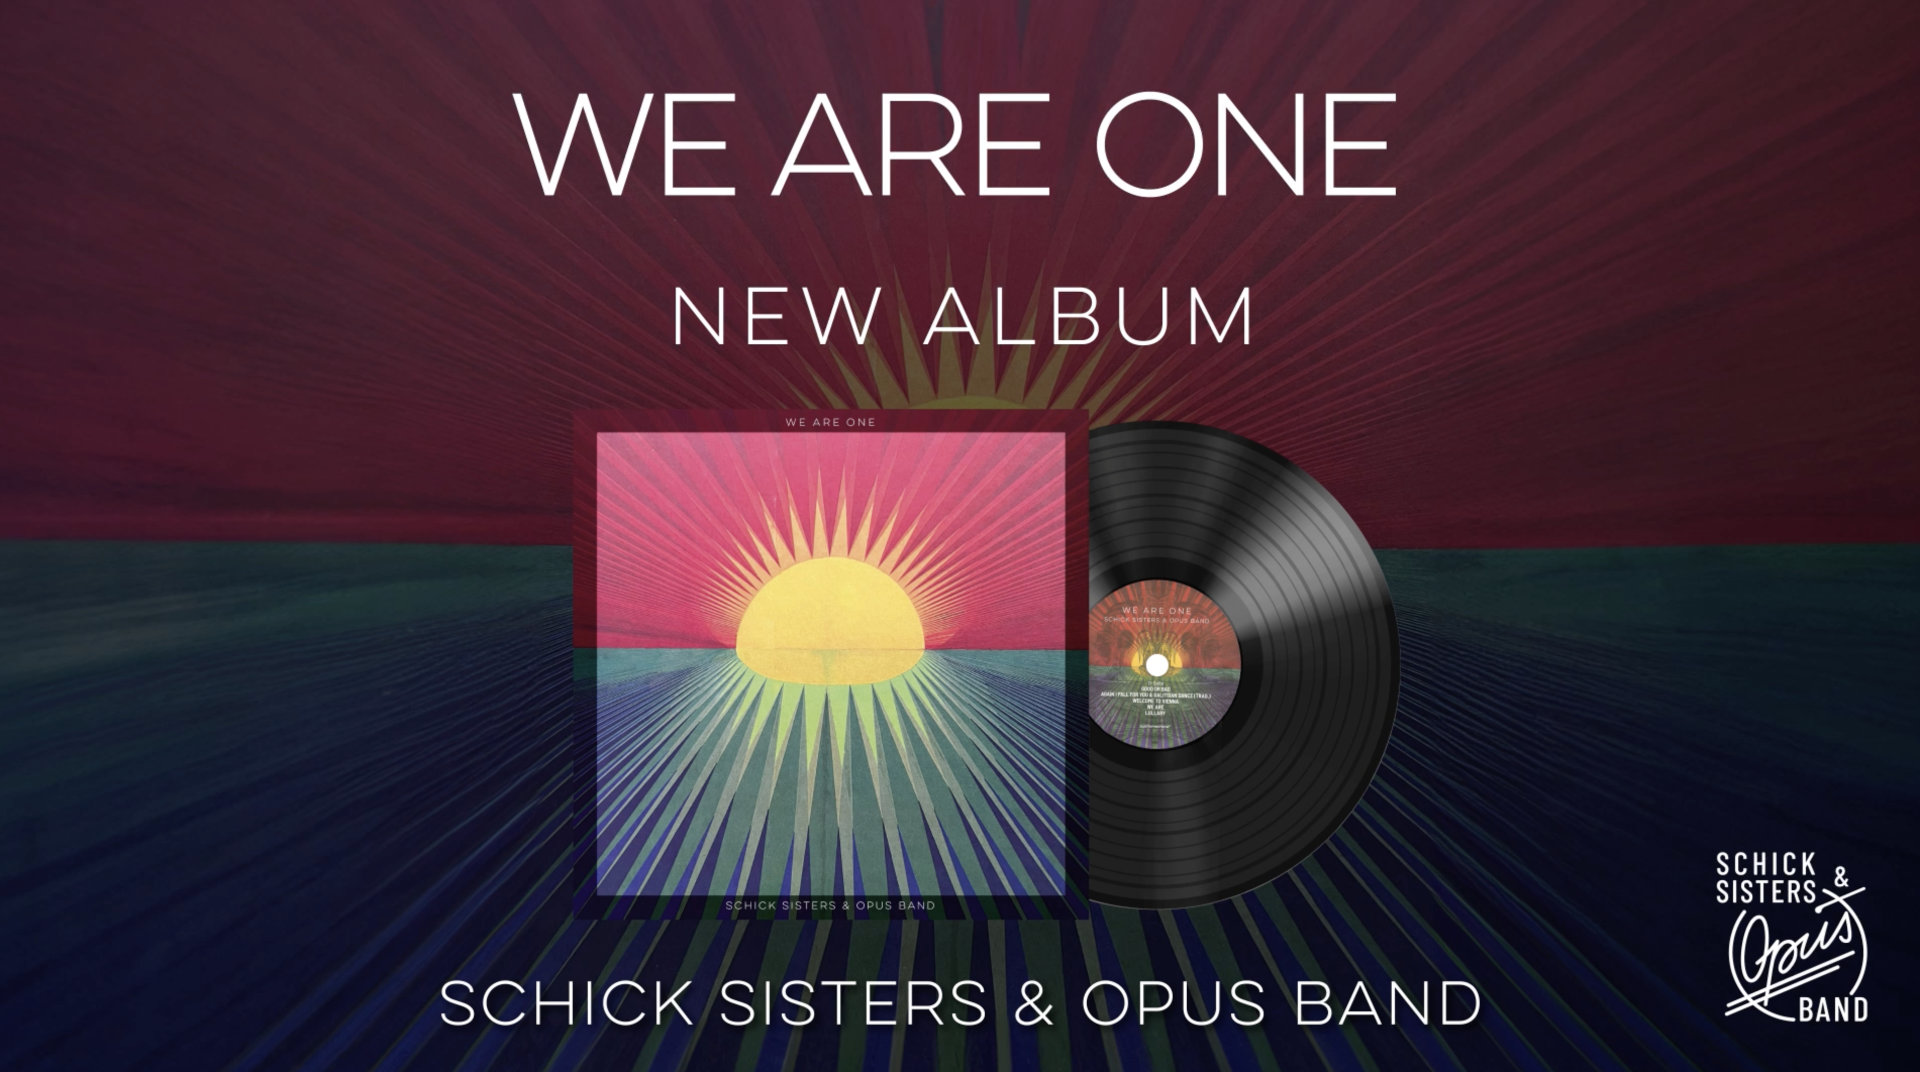 we are one album poster Live is Life, Life is Life Na na na Na nA ~ by OPUS & Andrew Lipsett